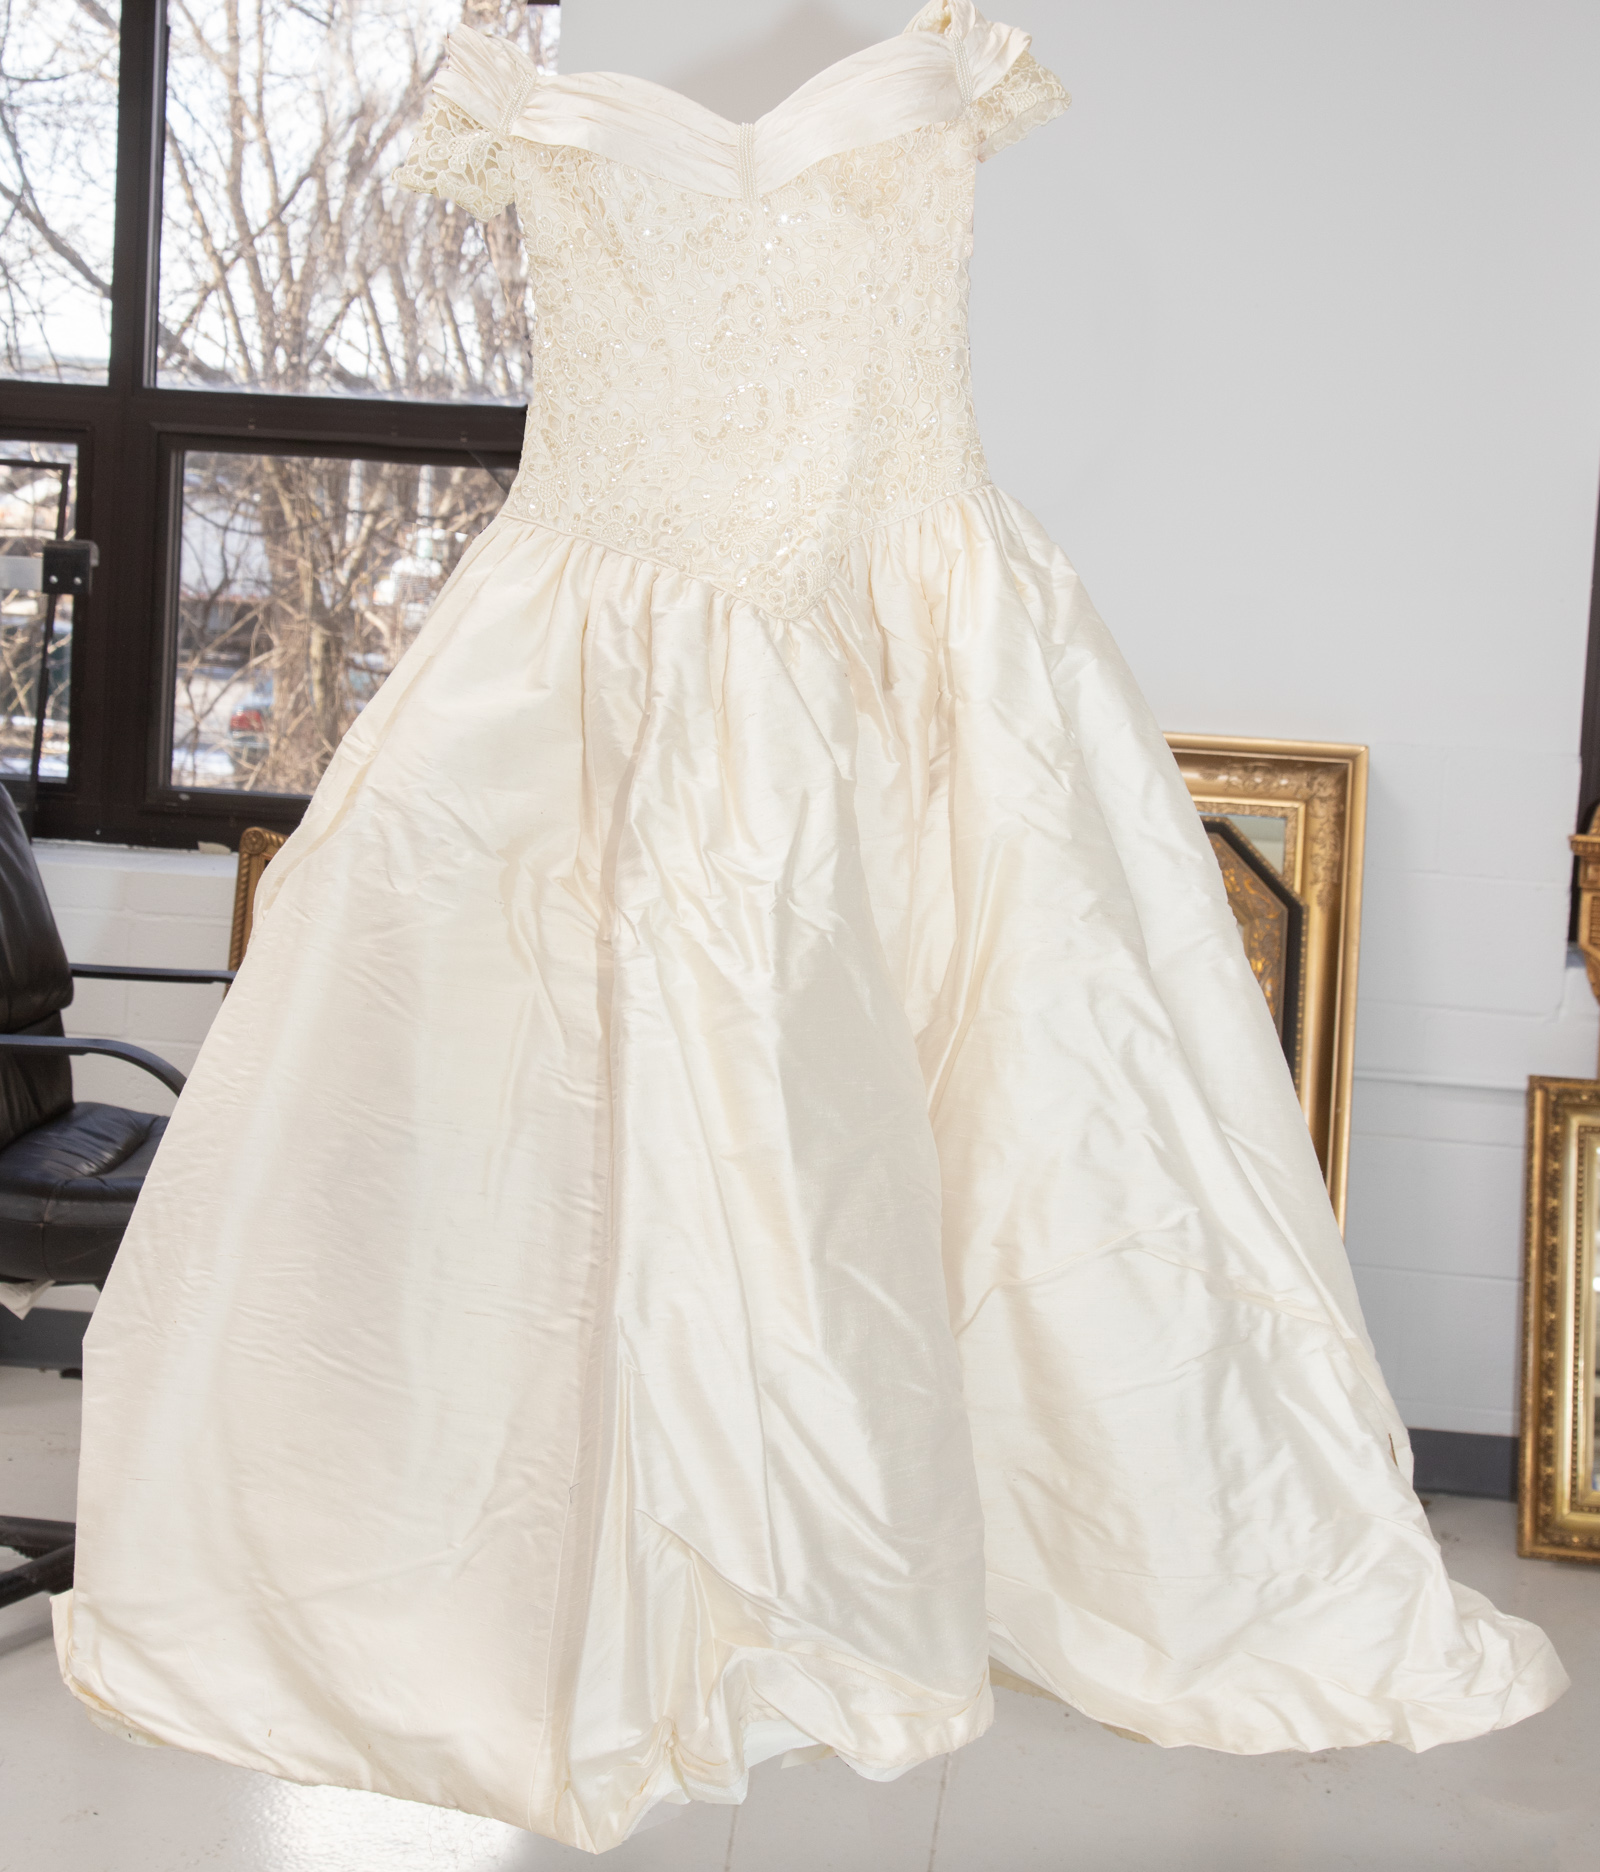 PROFESSIONALLY PACKAGED WEDDING GOWN